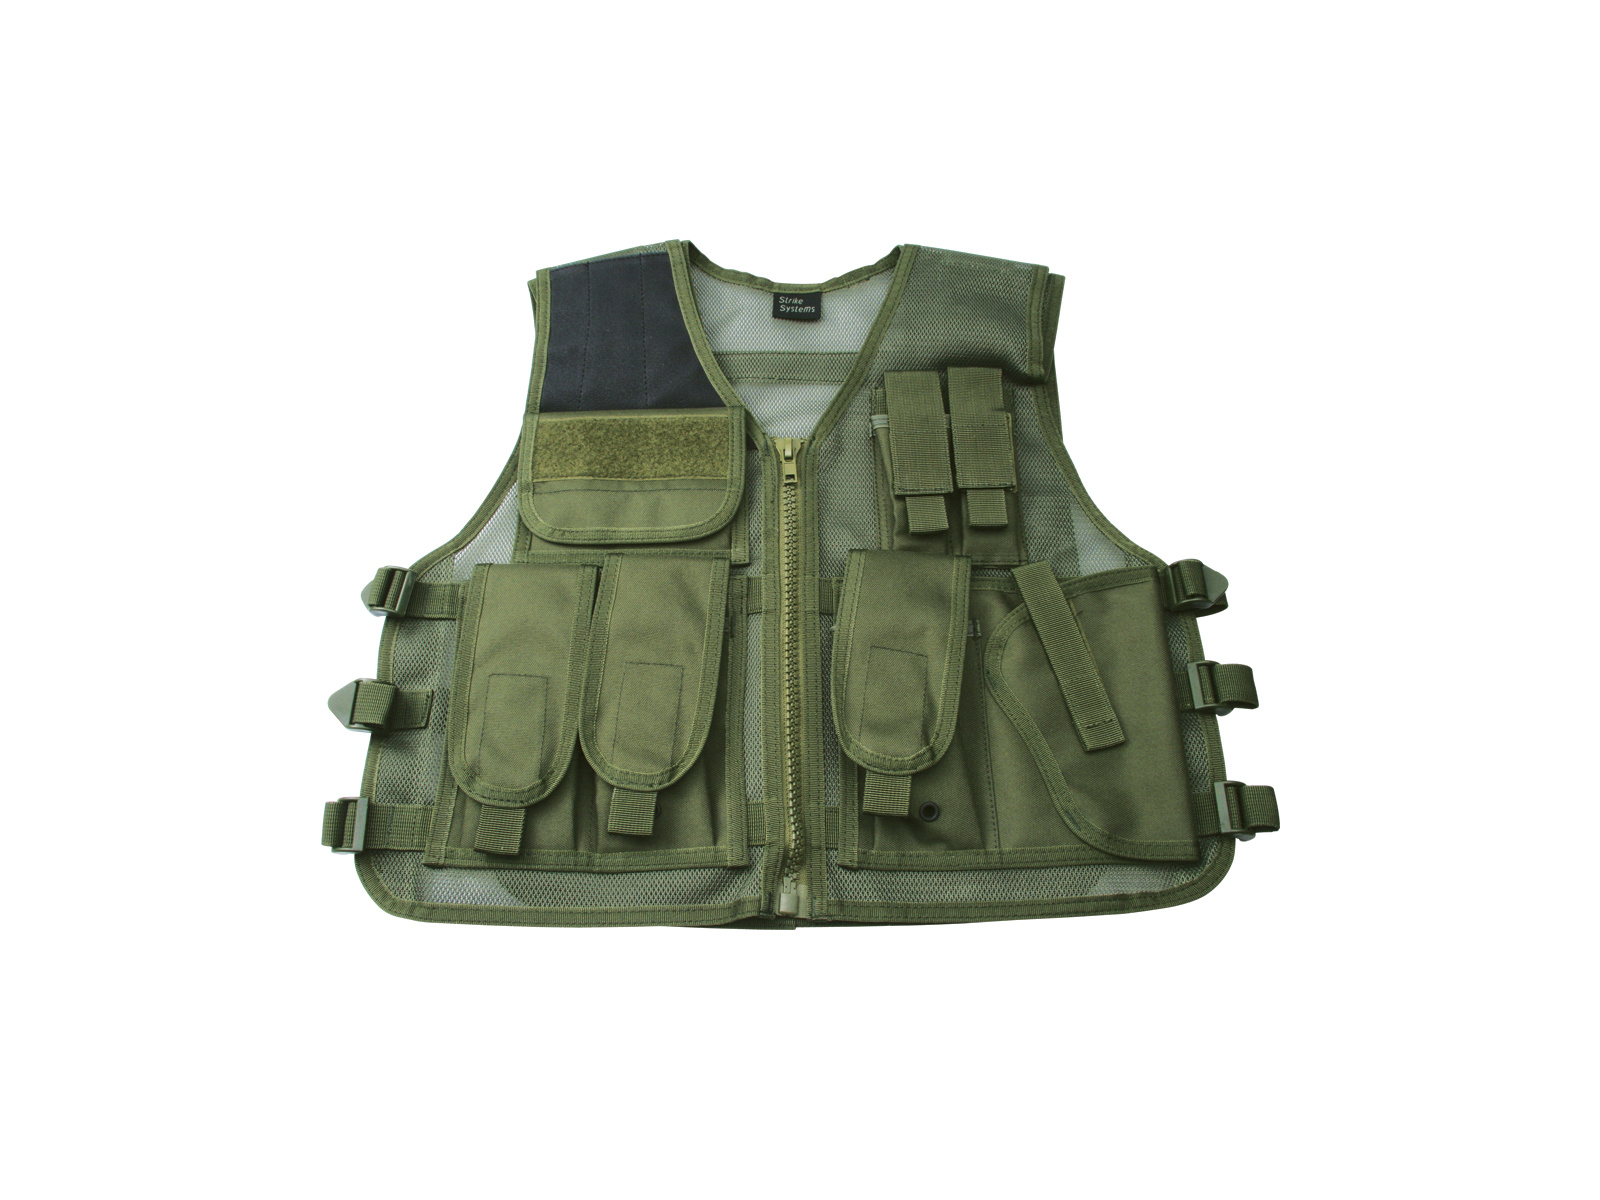 ASG Tactical vest with holster RECON - OD